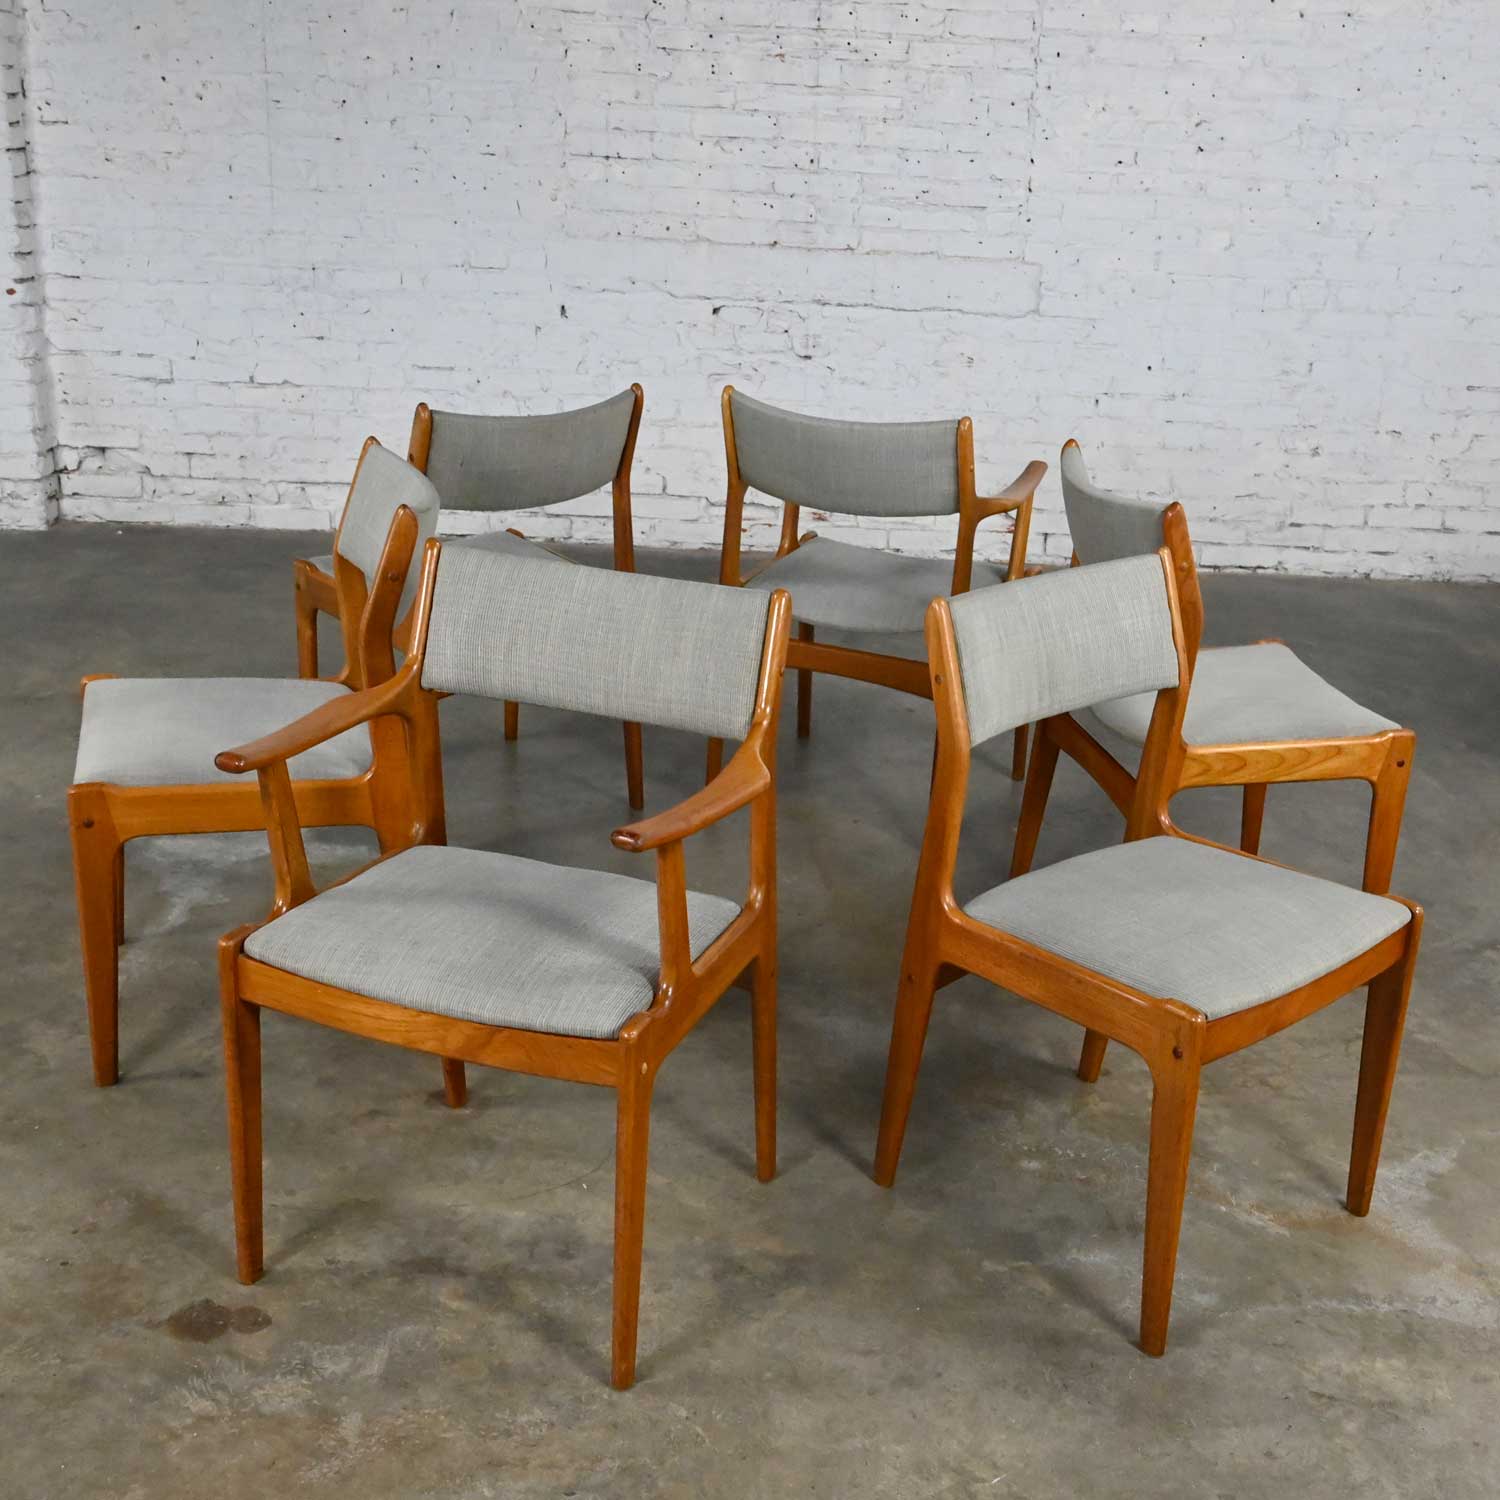 Stunning vintage Scandinavian Modern teak dining chairs with gray fabric seat & backs 2 arm and 4 side chairs, set of 6. Beautiful condition, keeping in mind that these are vintage and not new so will have signs of use and wear. They have been